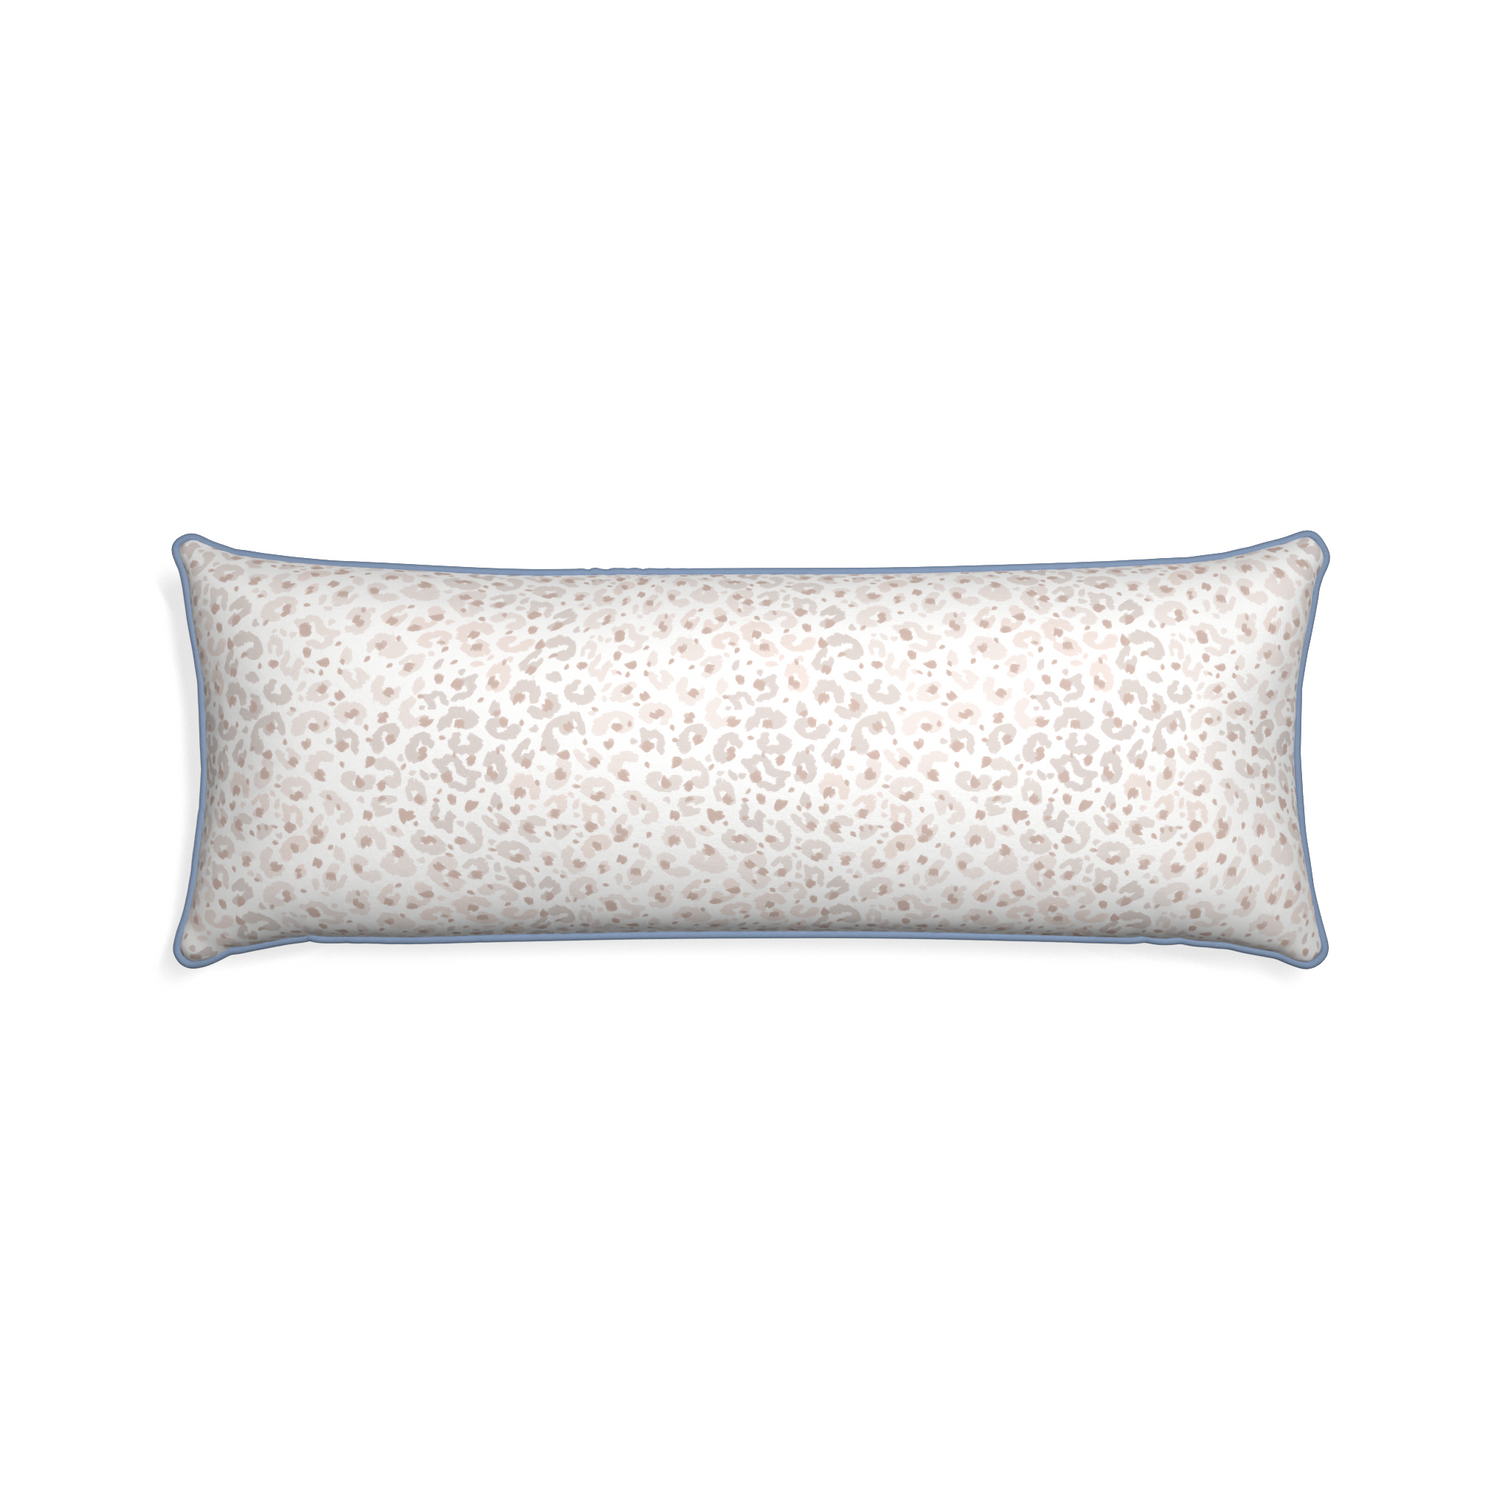 Xl-lumbar rosie custom beige animal printpillow with sky piping on white background